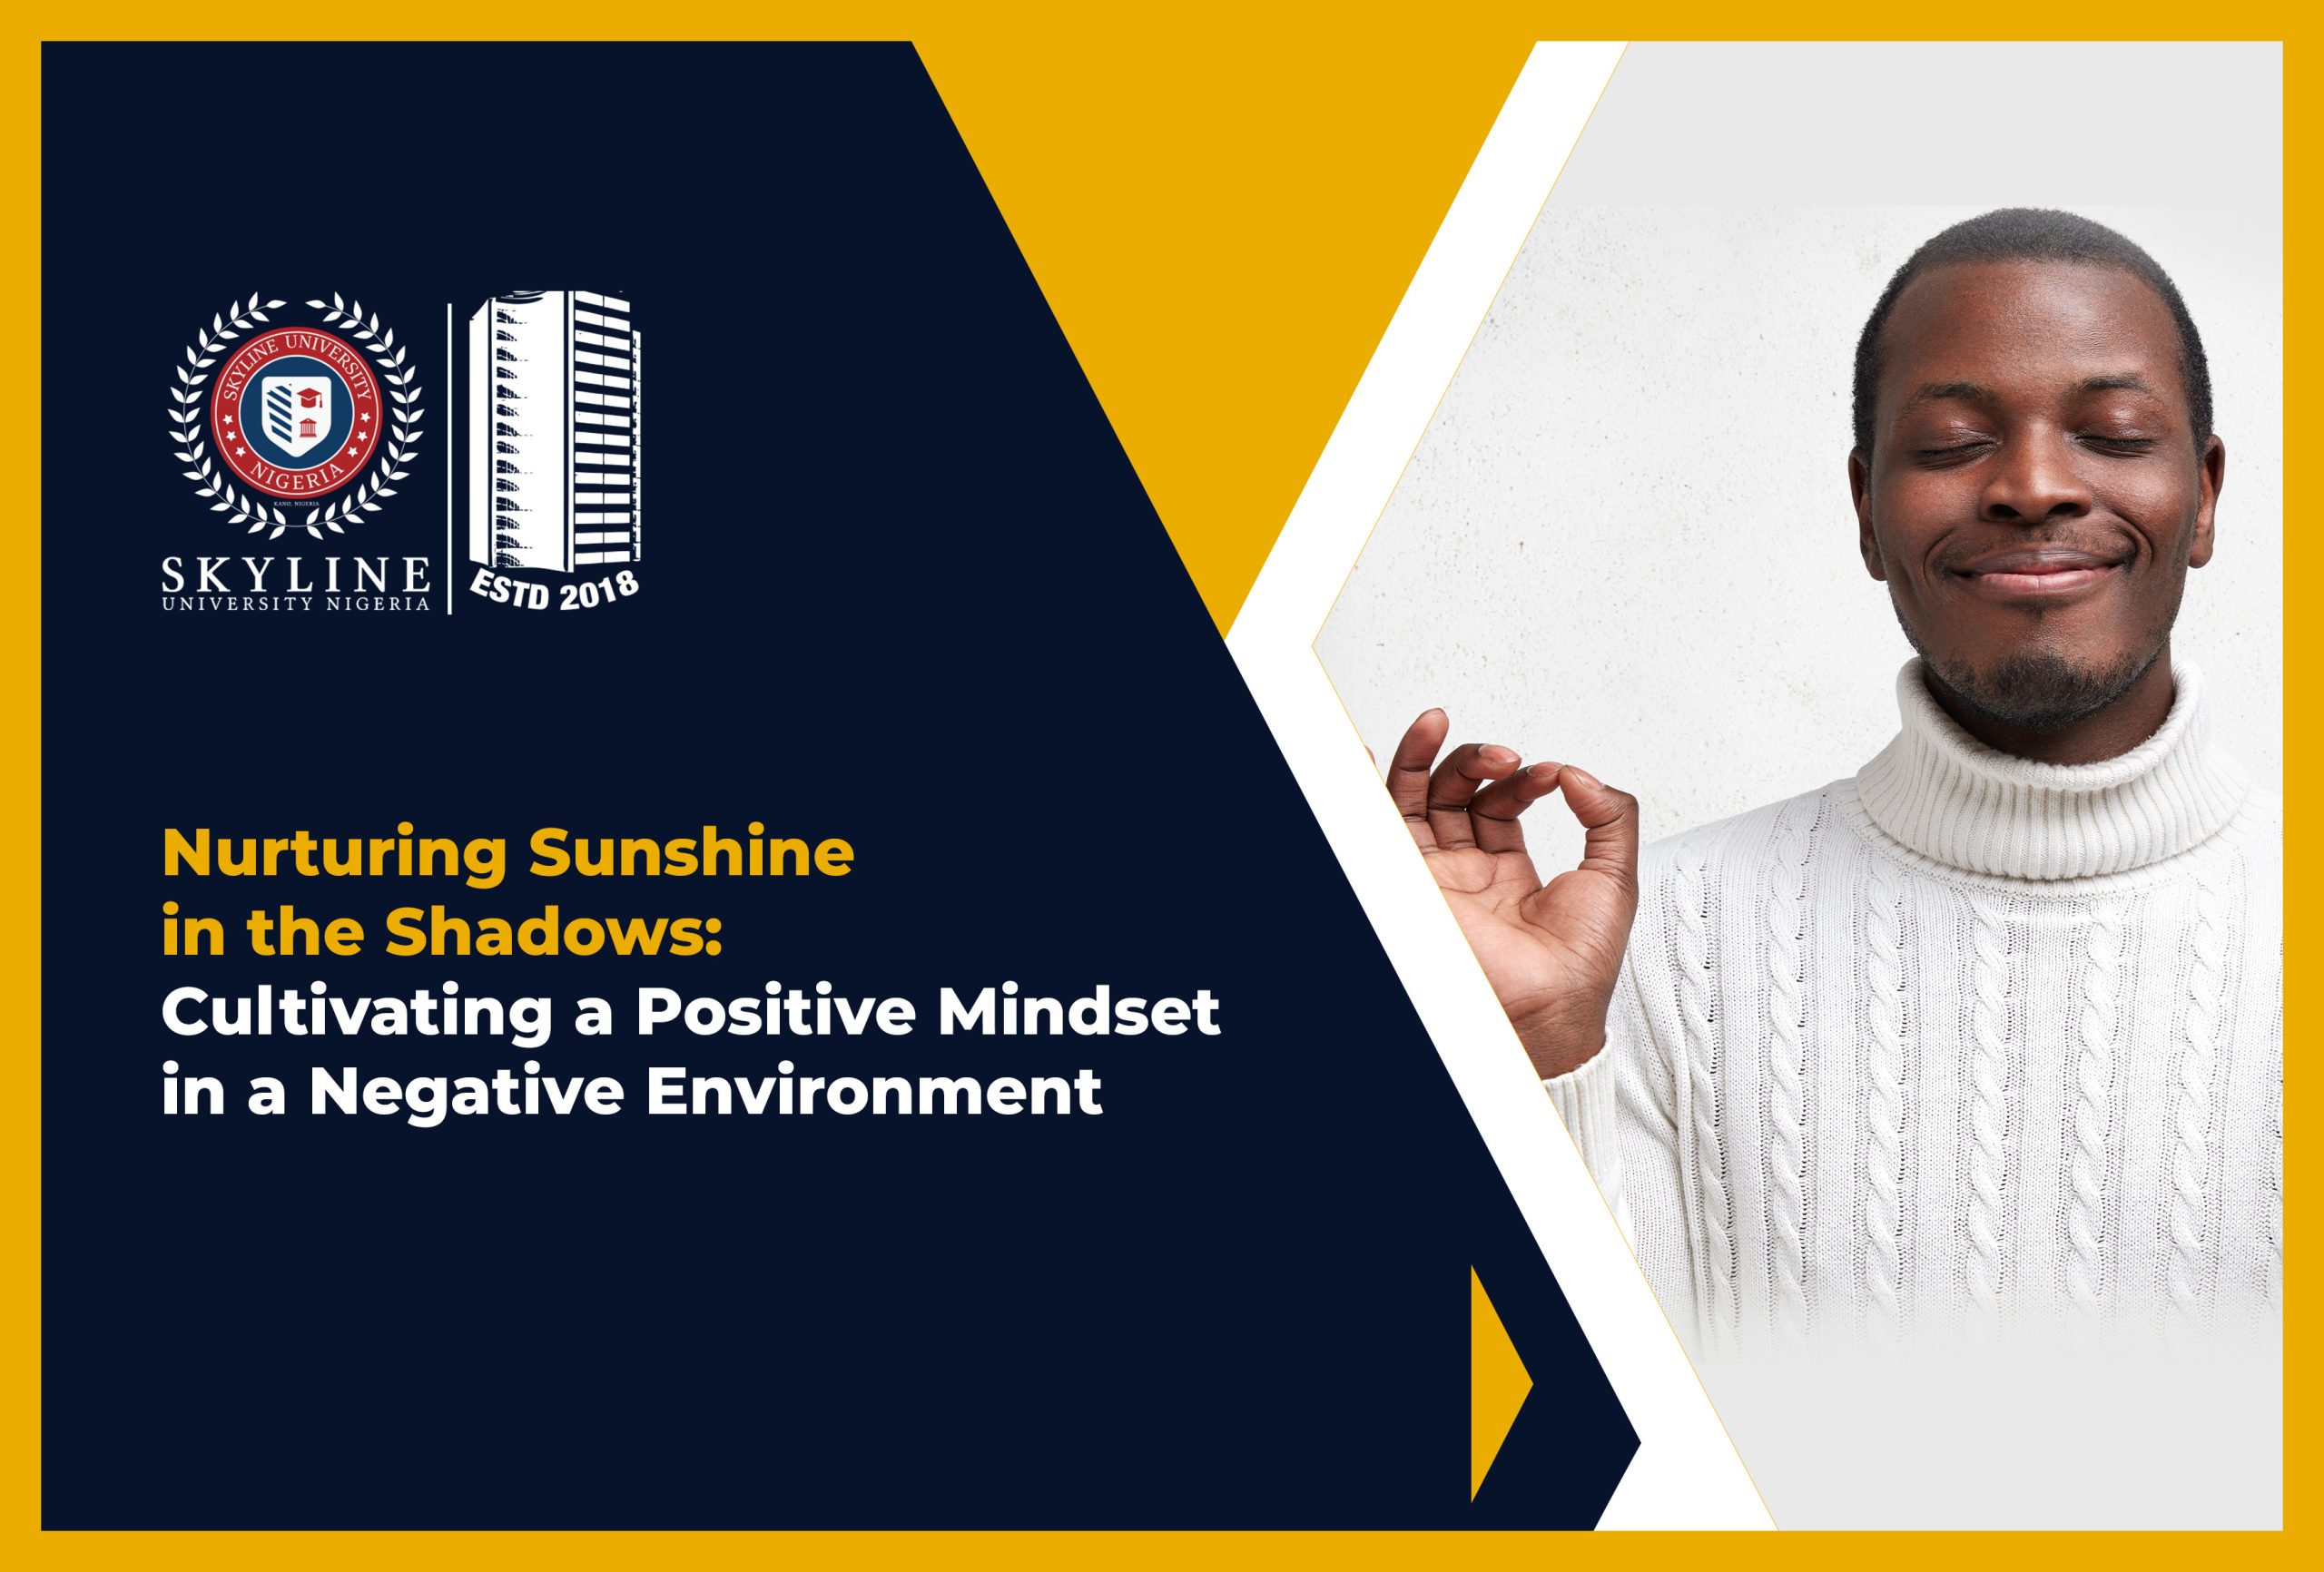 Nurturing Sunshine in the Shadows: Cultivating a Positive Mindset in a Negative Environment